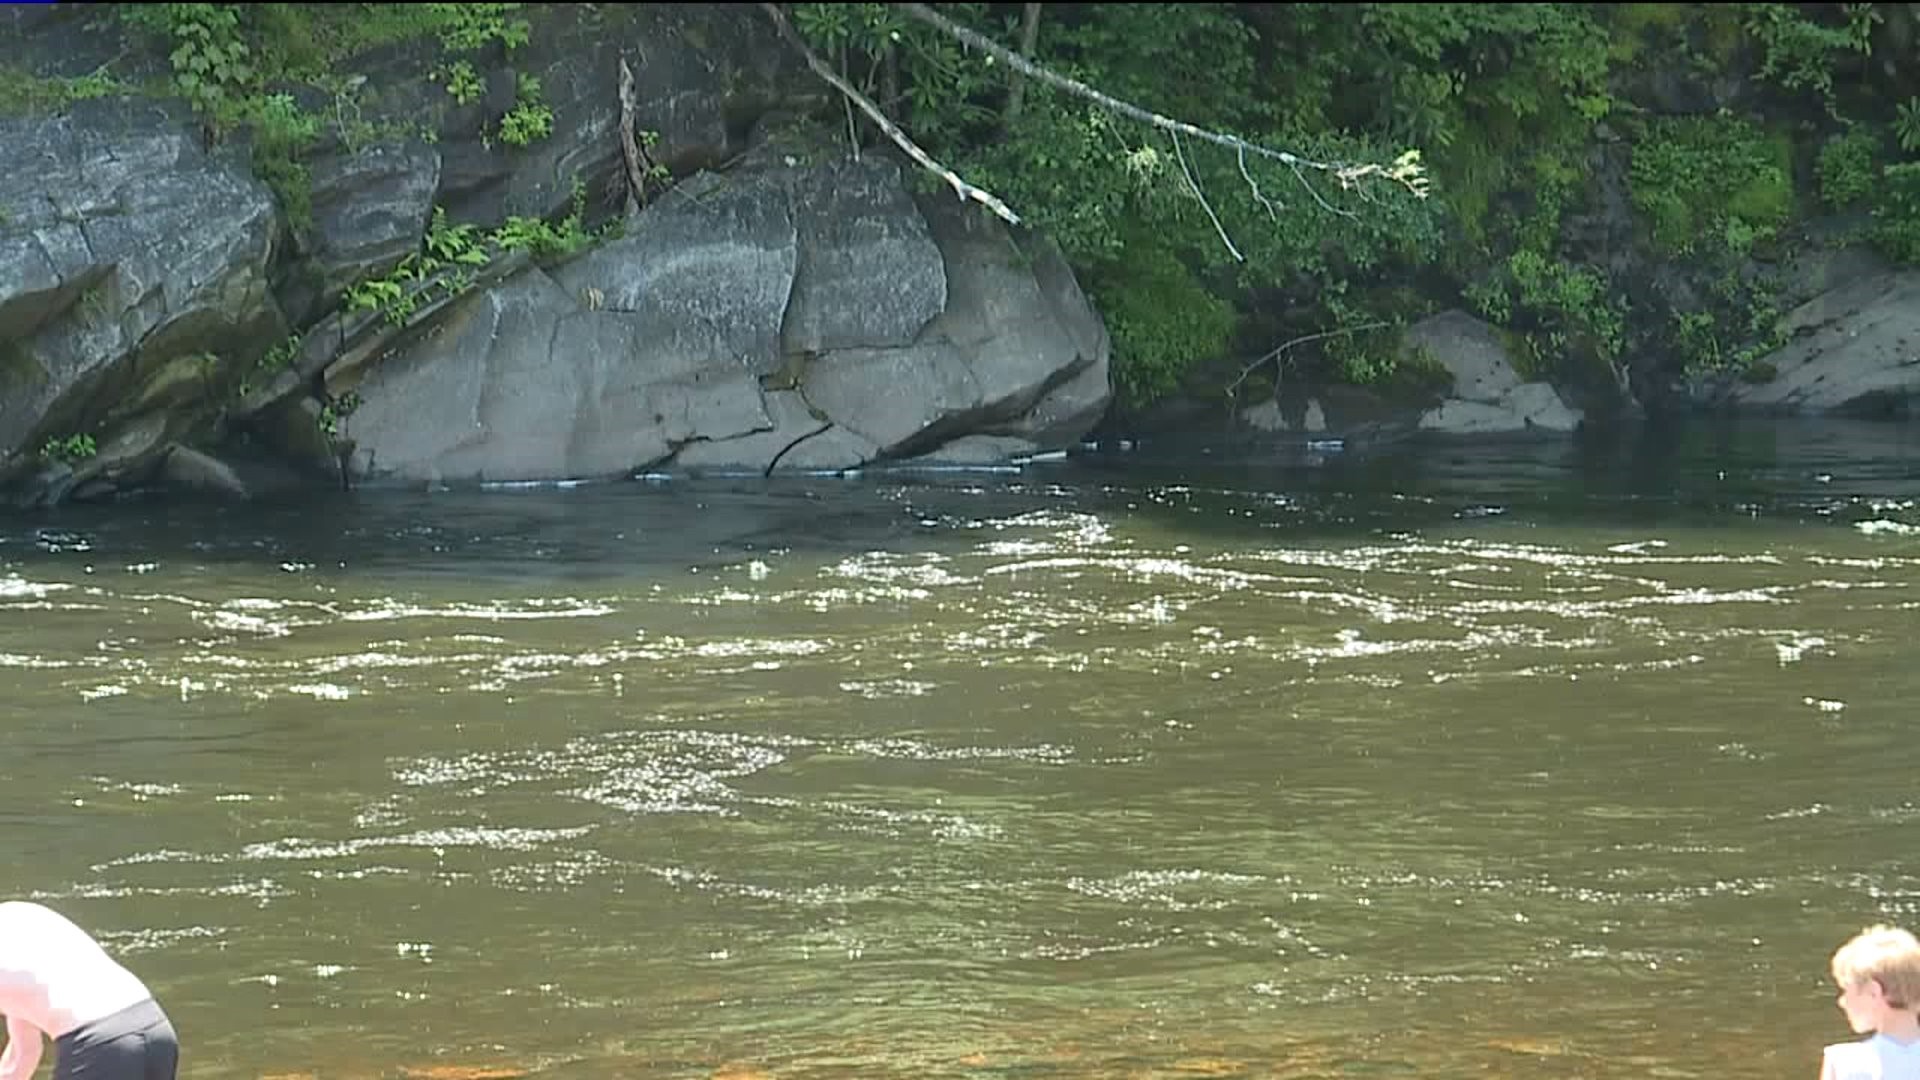 Body of Missing Swimmer Pulled from Water at Lehigh Gorge State Park